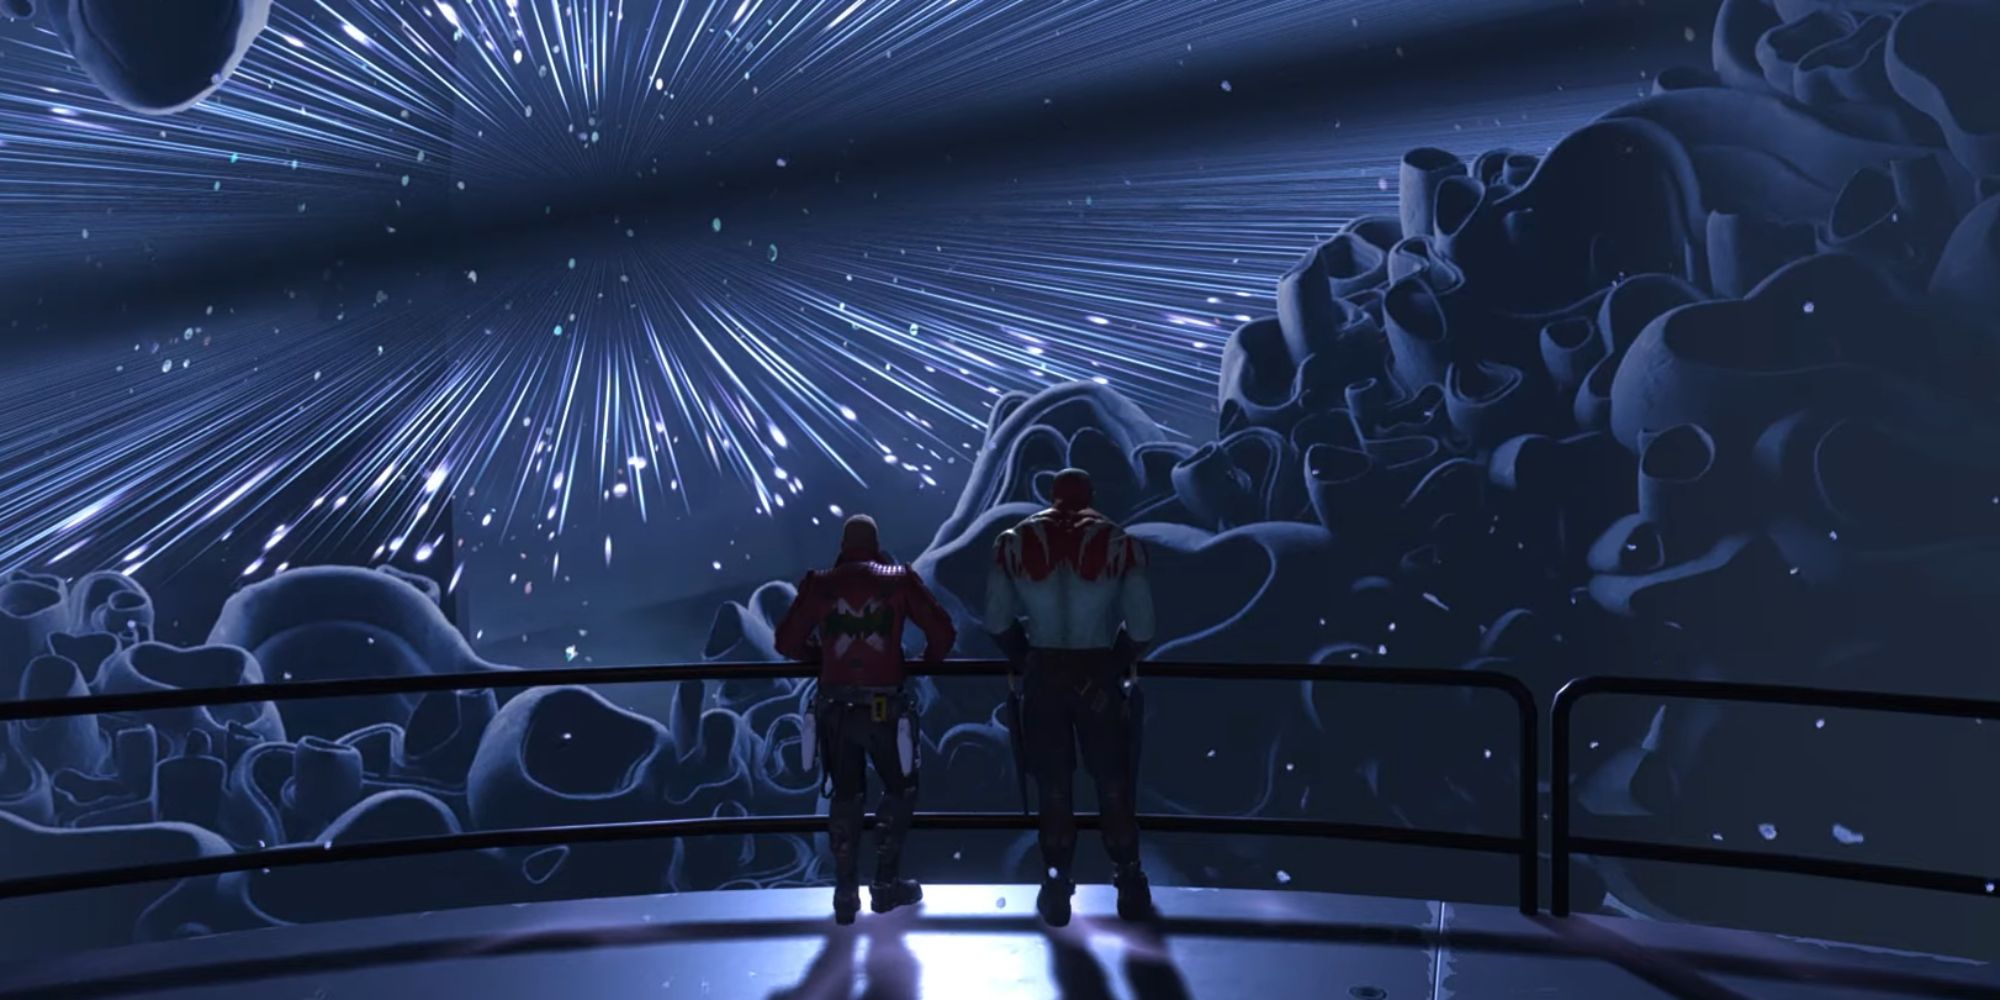 Guardians Of The Galaxy Screenshot Of Peter and Drax On Knowhere Looking Into Rift